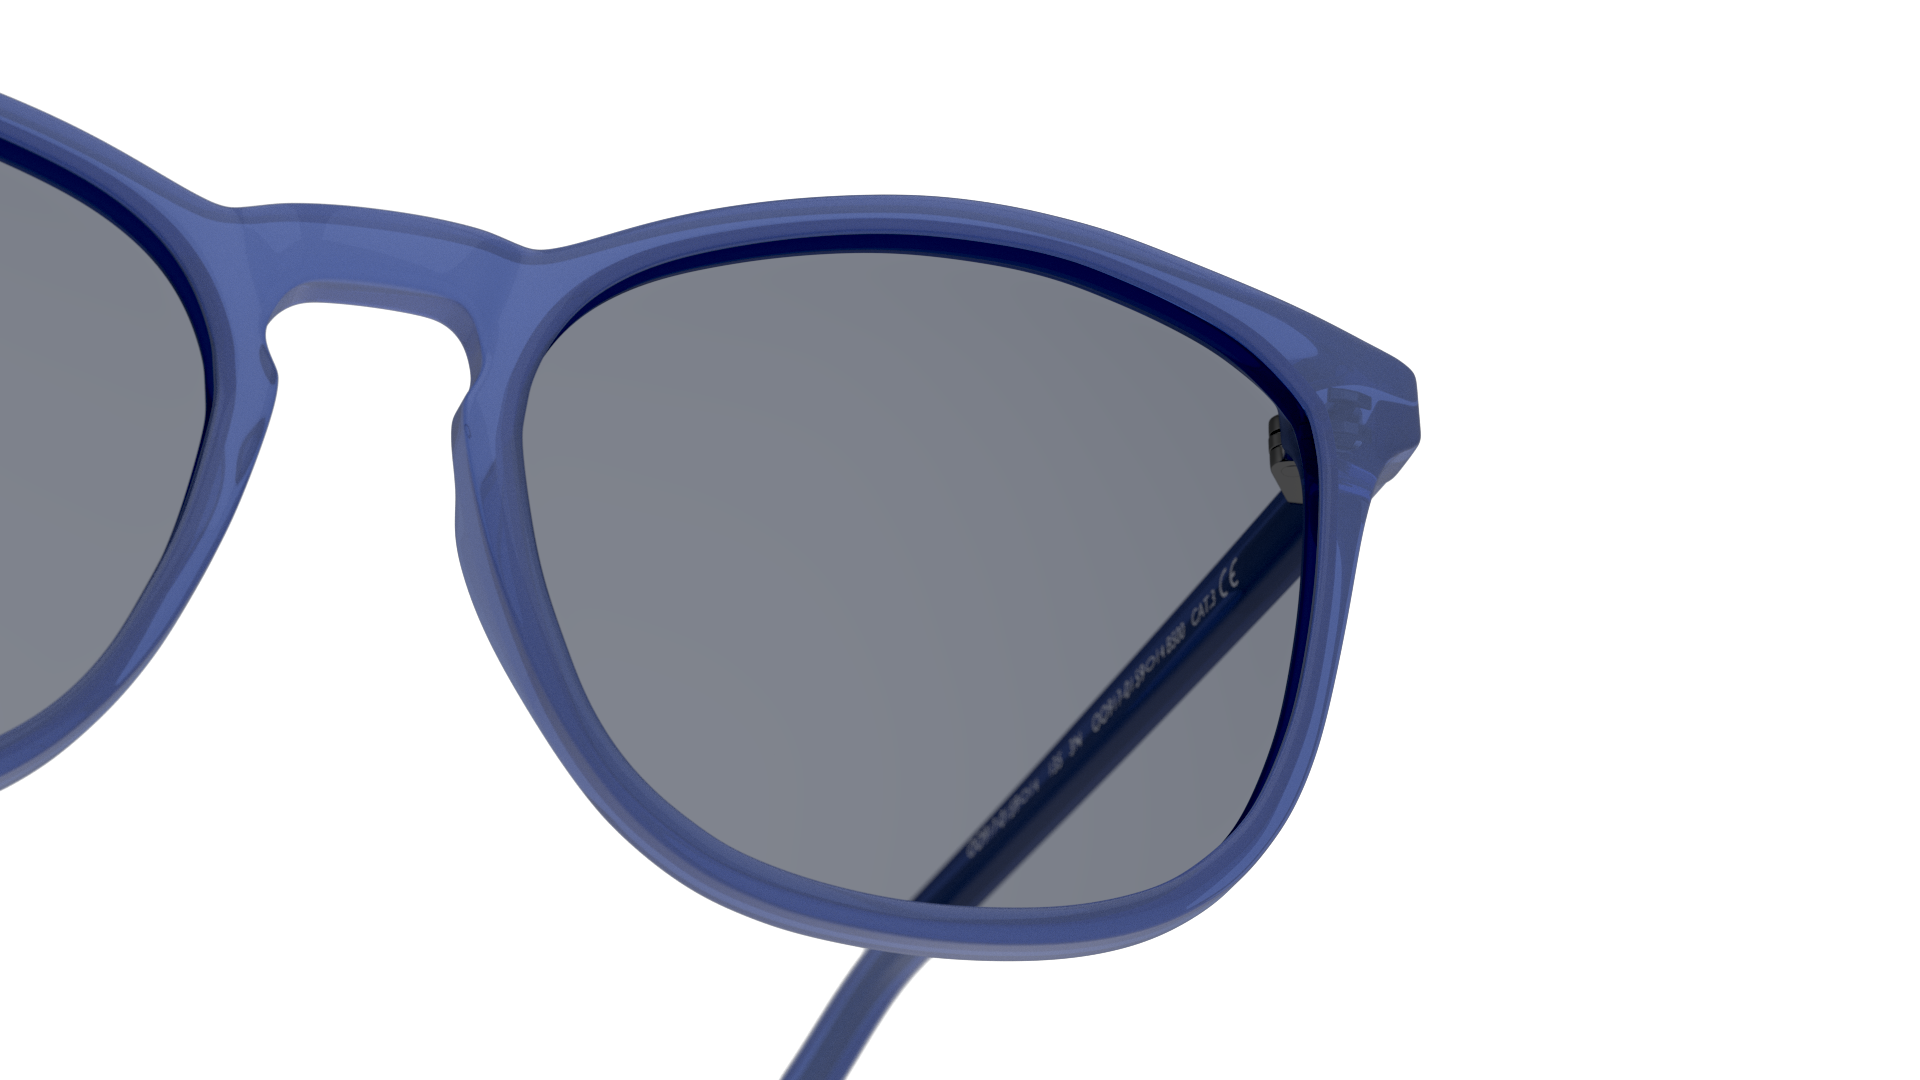 [products.image.detail01] Seen SNSU0020 Sunglasses